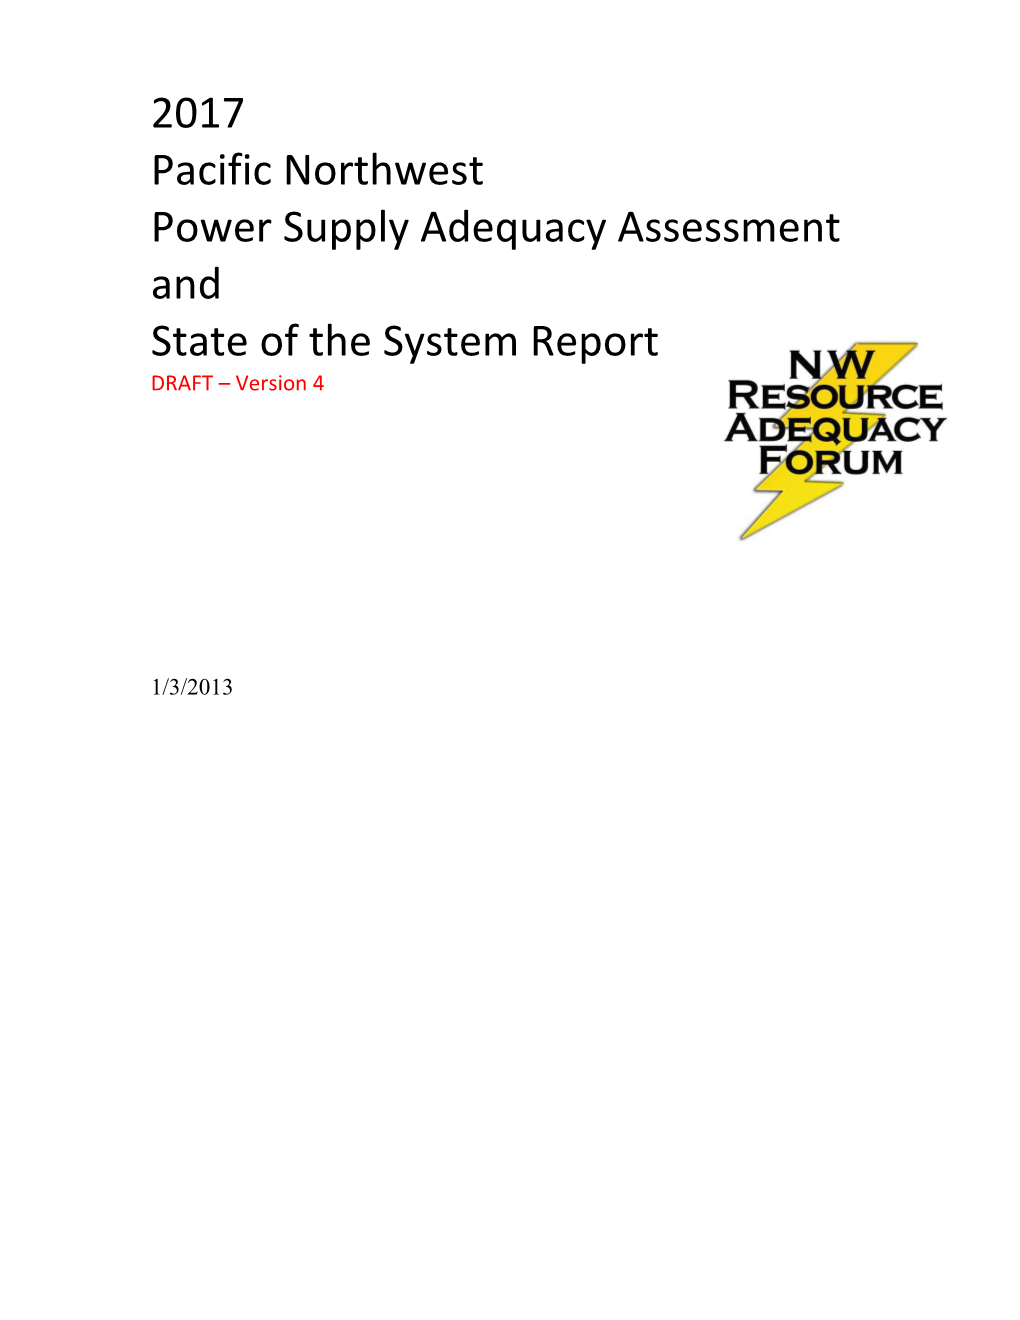 2017 Pacific Northwest Power Supply Adequacy Assessment and State of the System Report